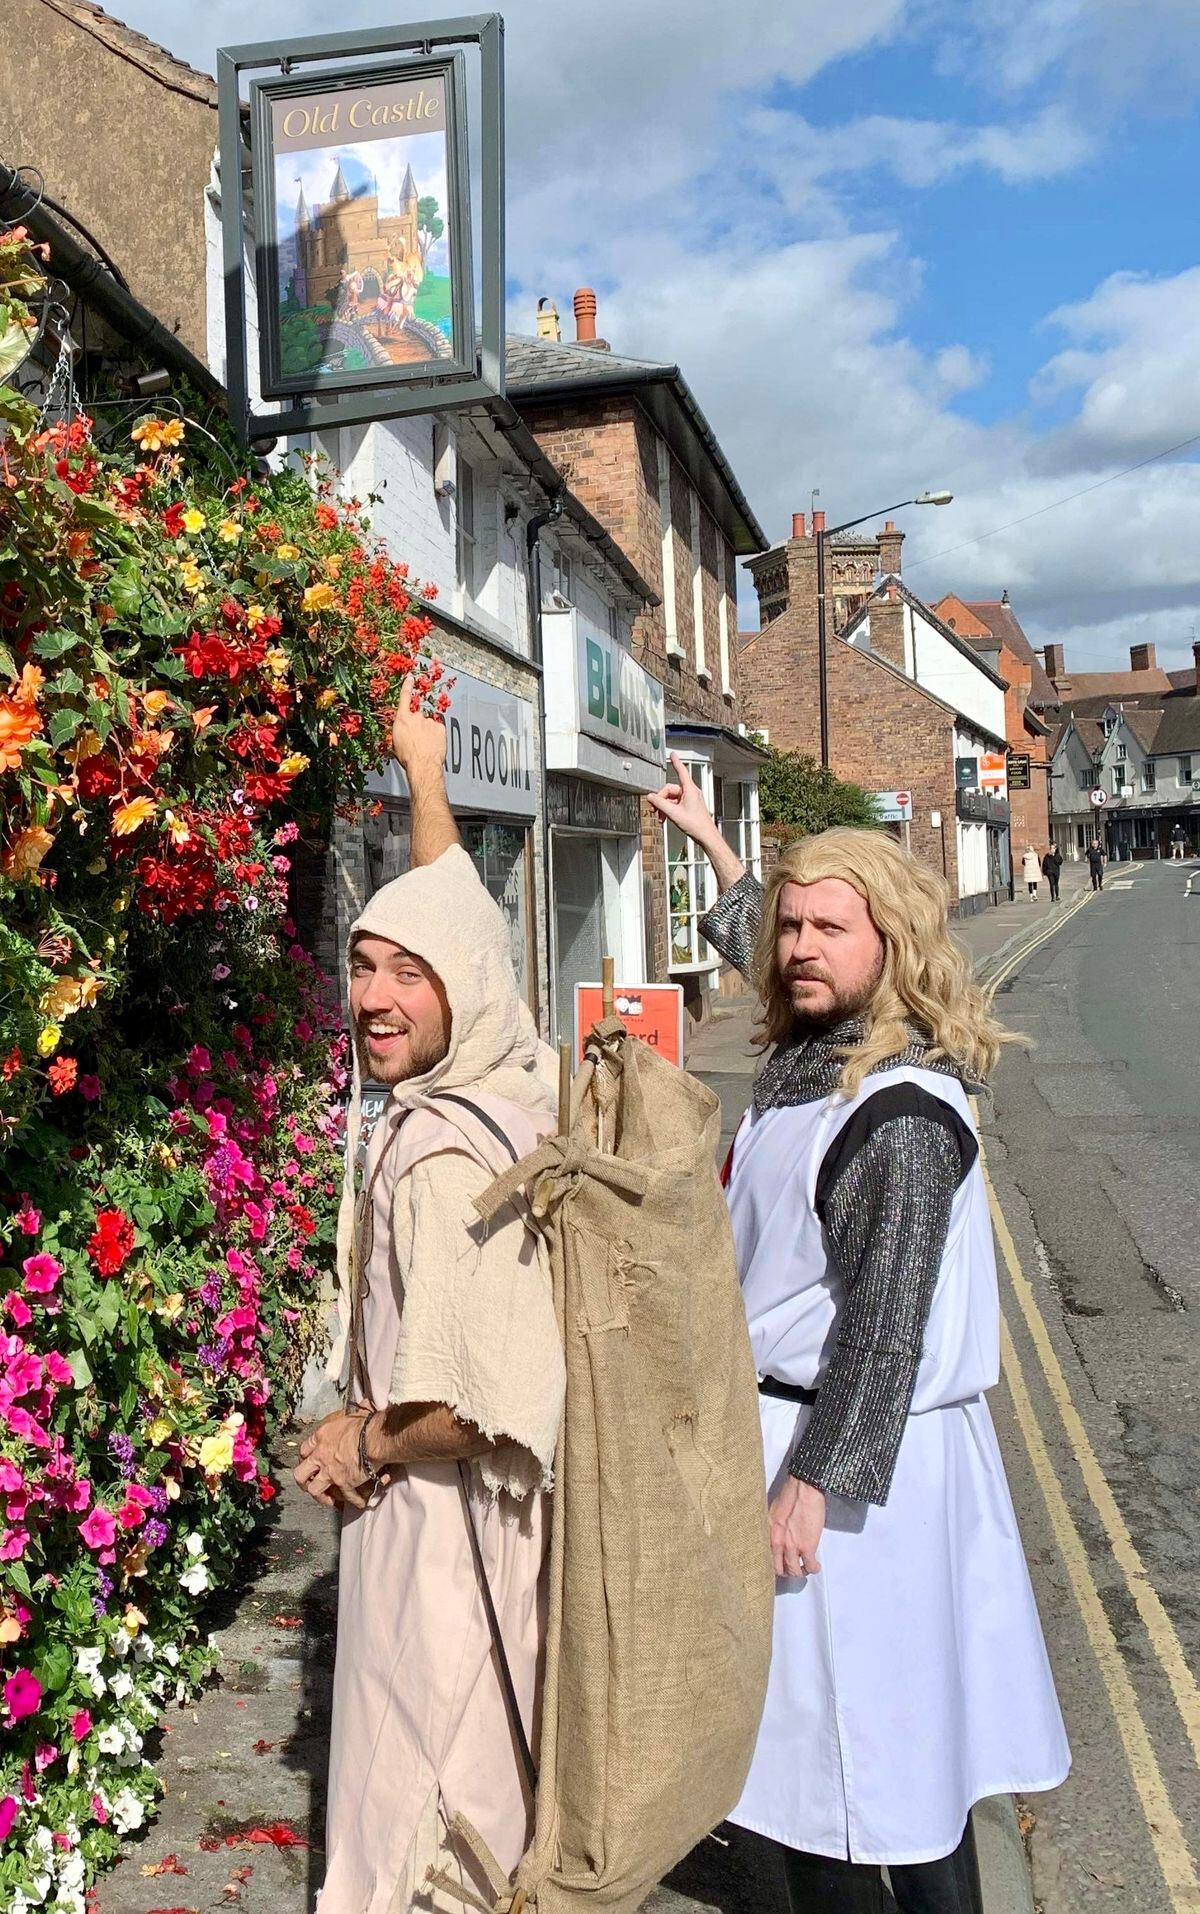 Knights from Spamalot seen in Bridgnorth